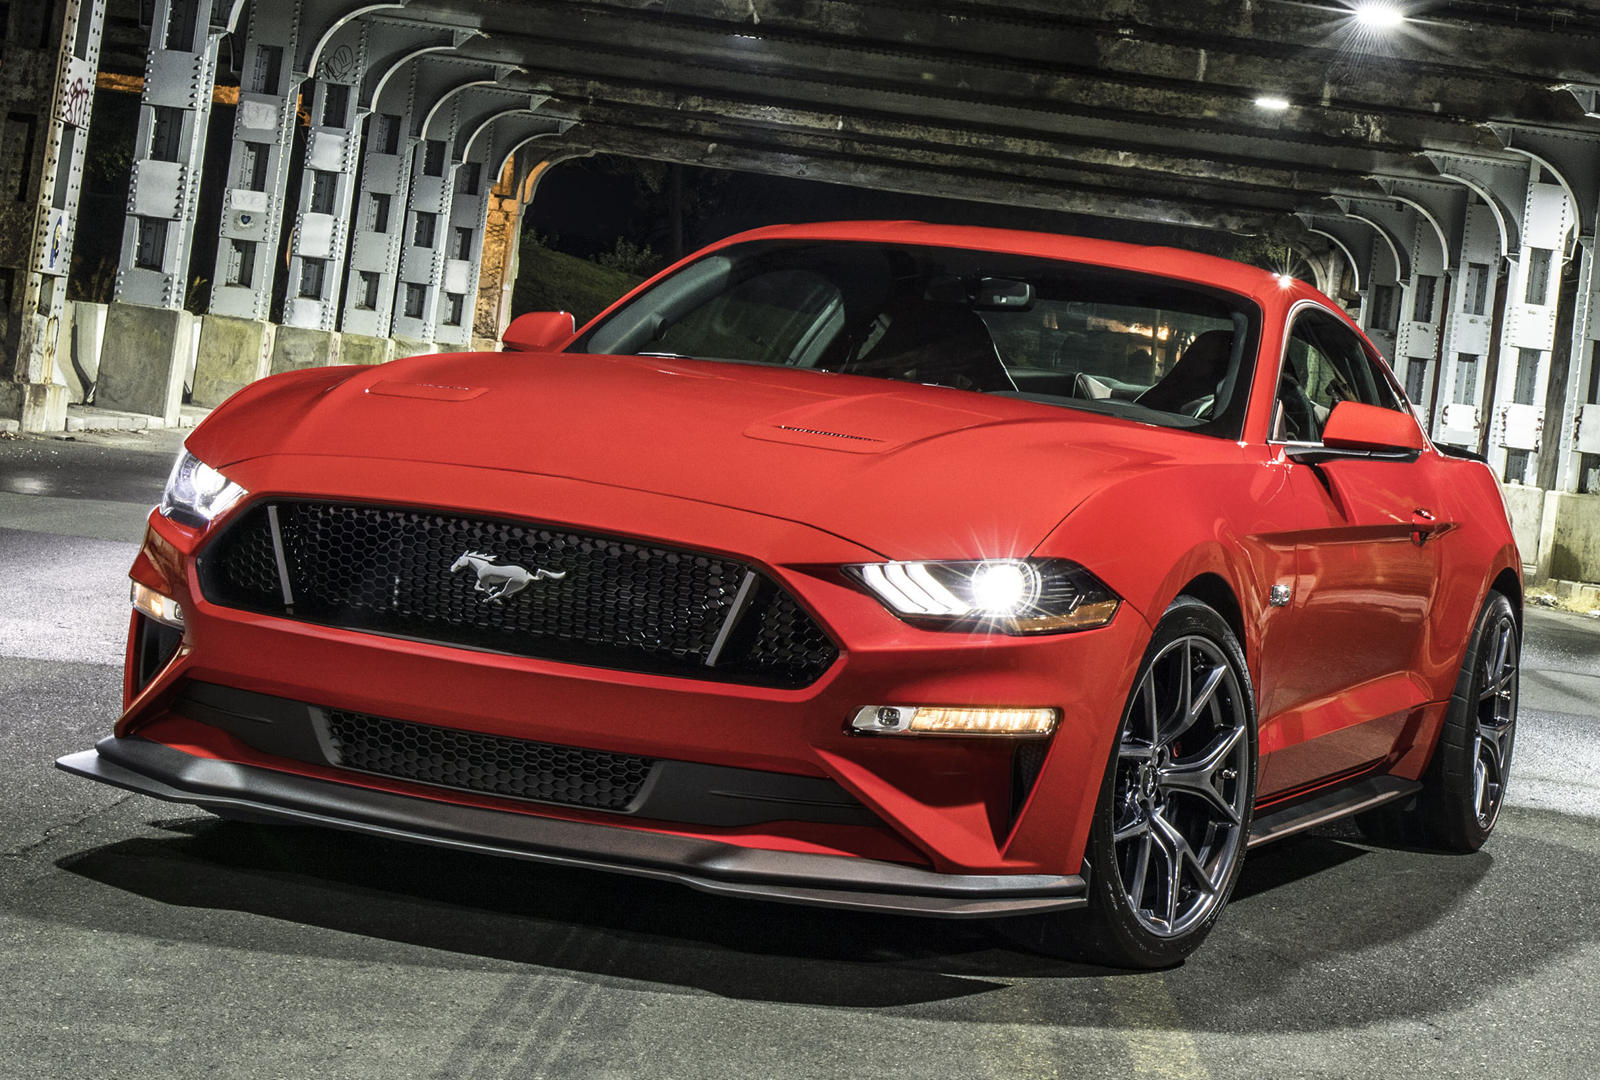 Ford Mustang Fathouse Performance 1000R mit 1000 PS - AUTO BILD